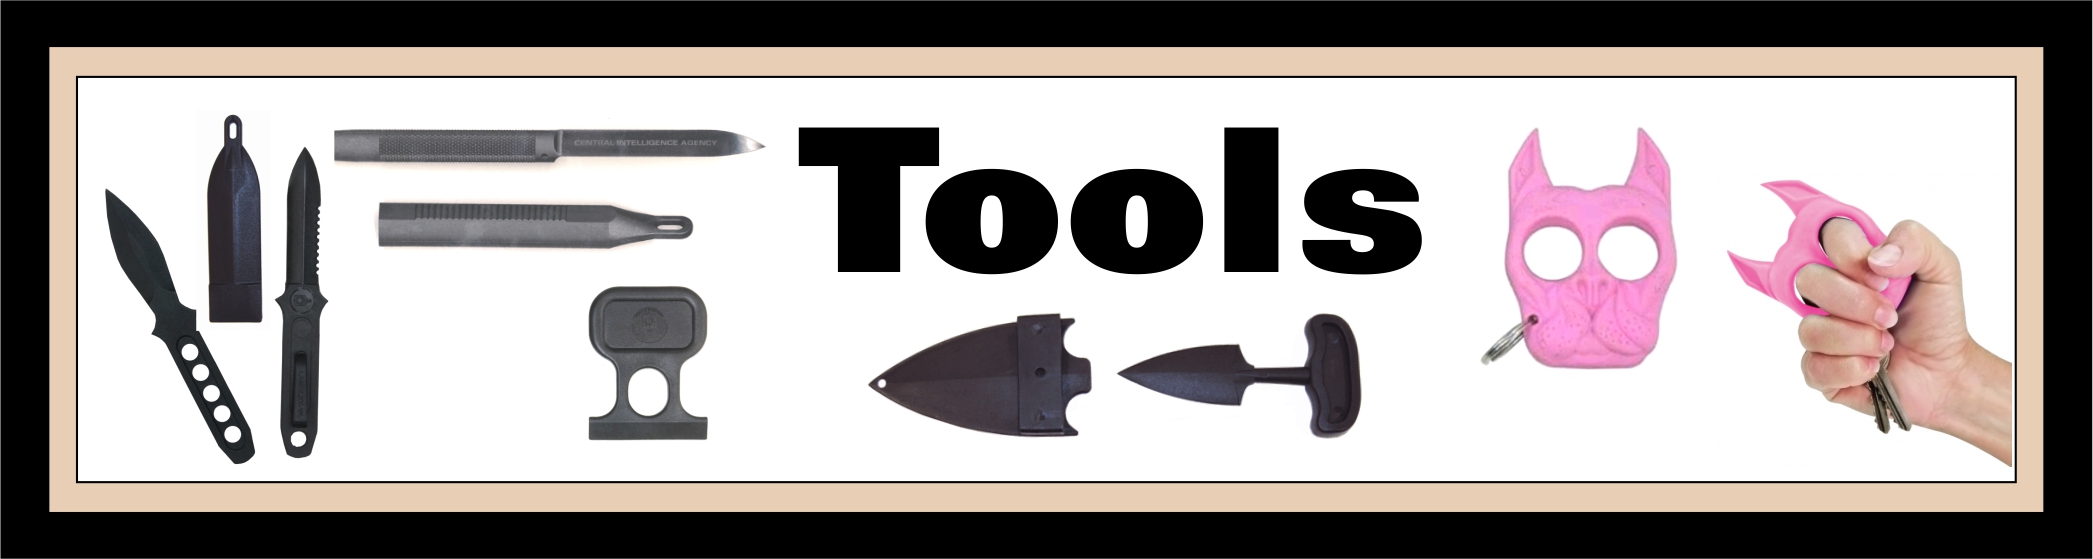 Tools - Brutus Key Chains, Sticker Knives, Pen Dart, Ice Scrappers, Sheaths and Belt Buckles